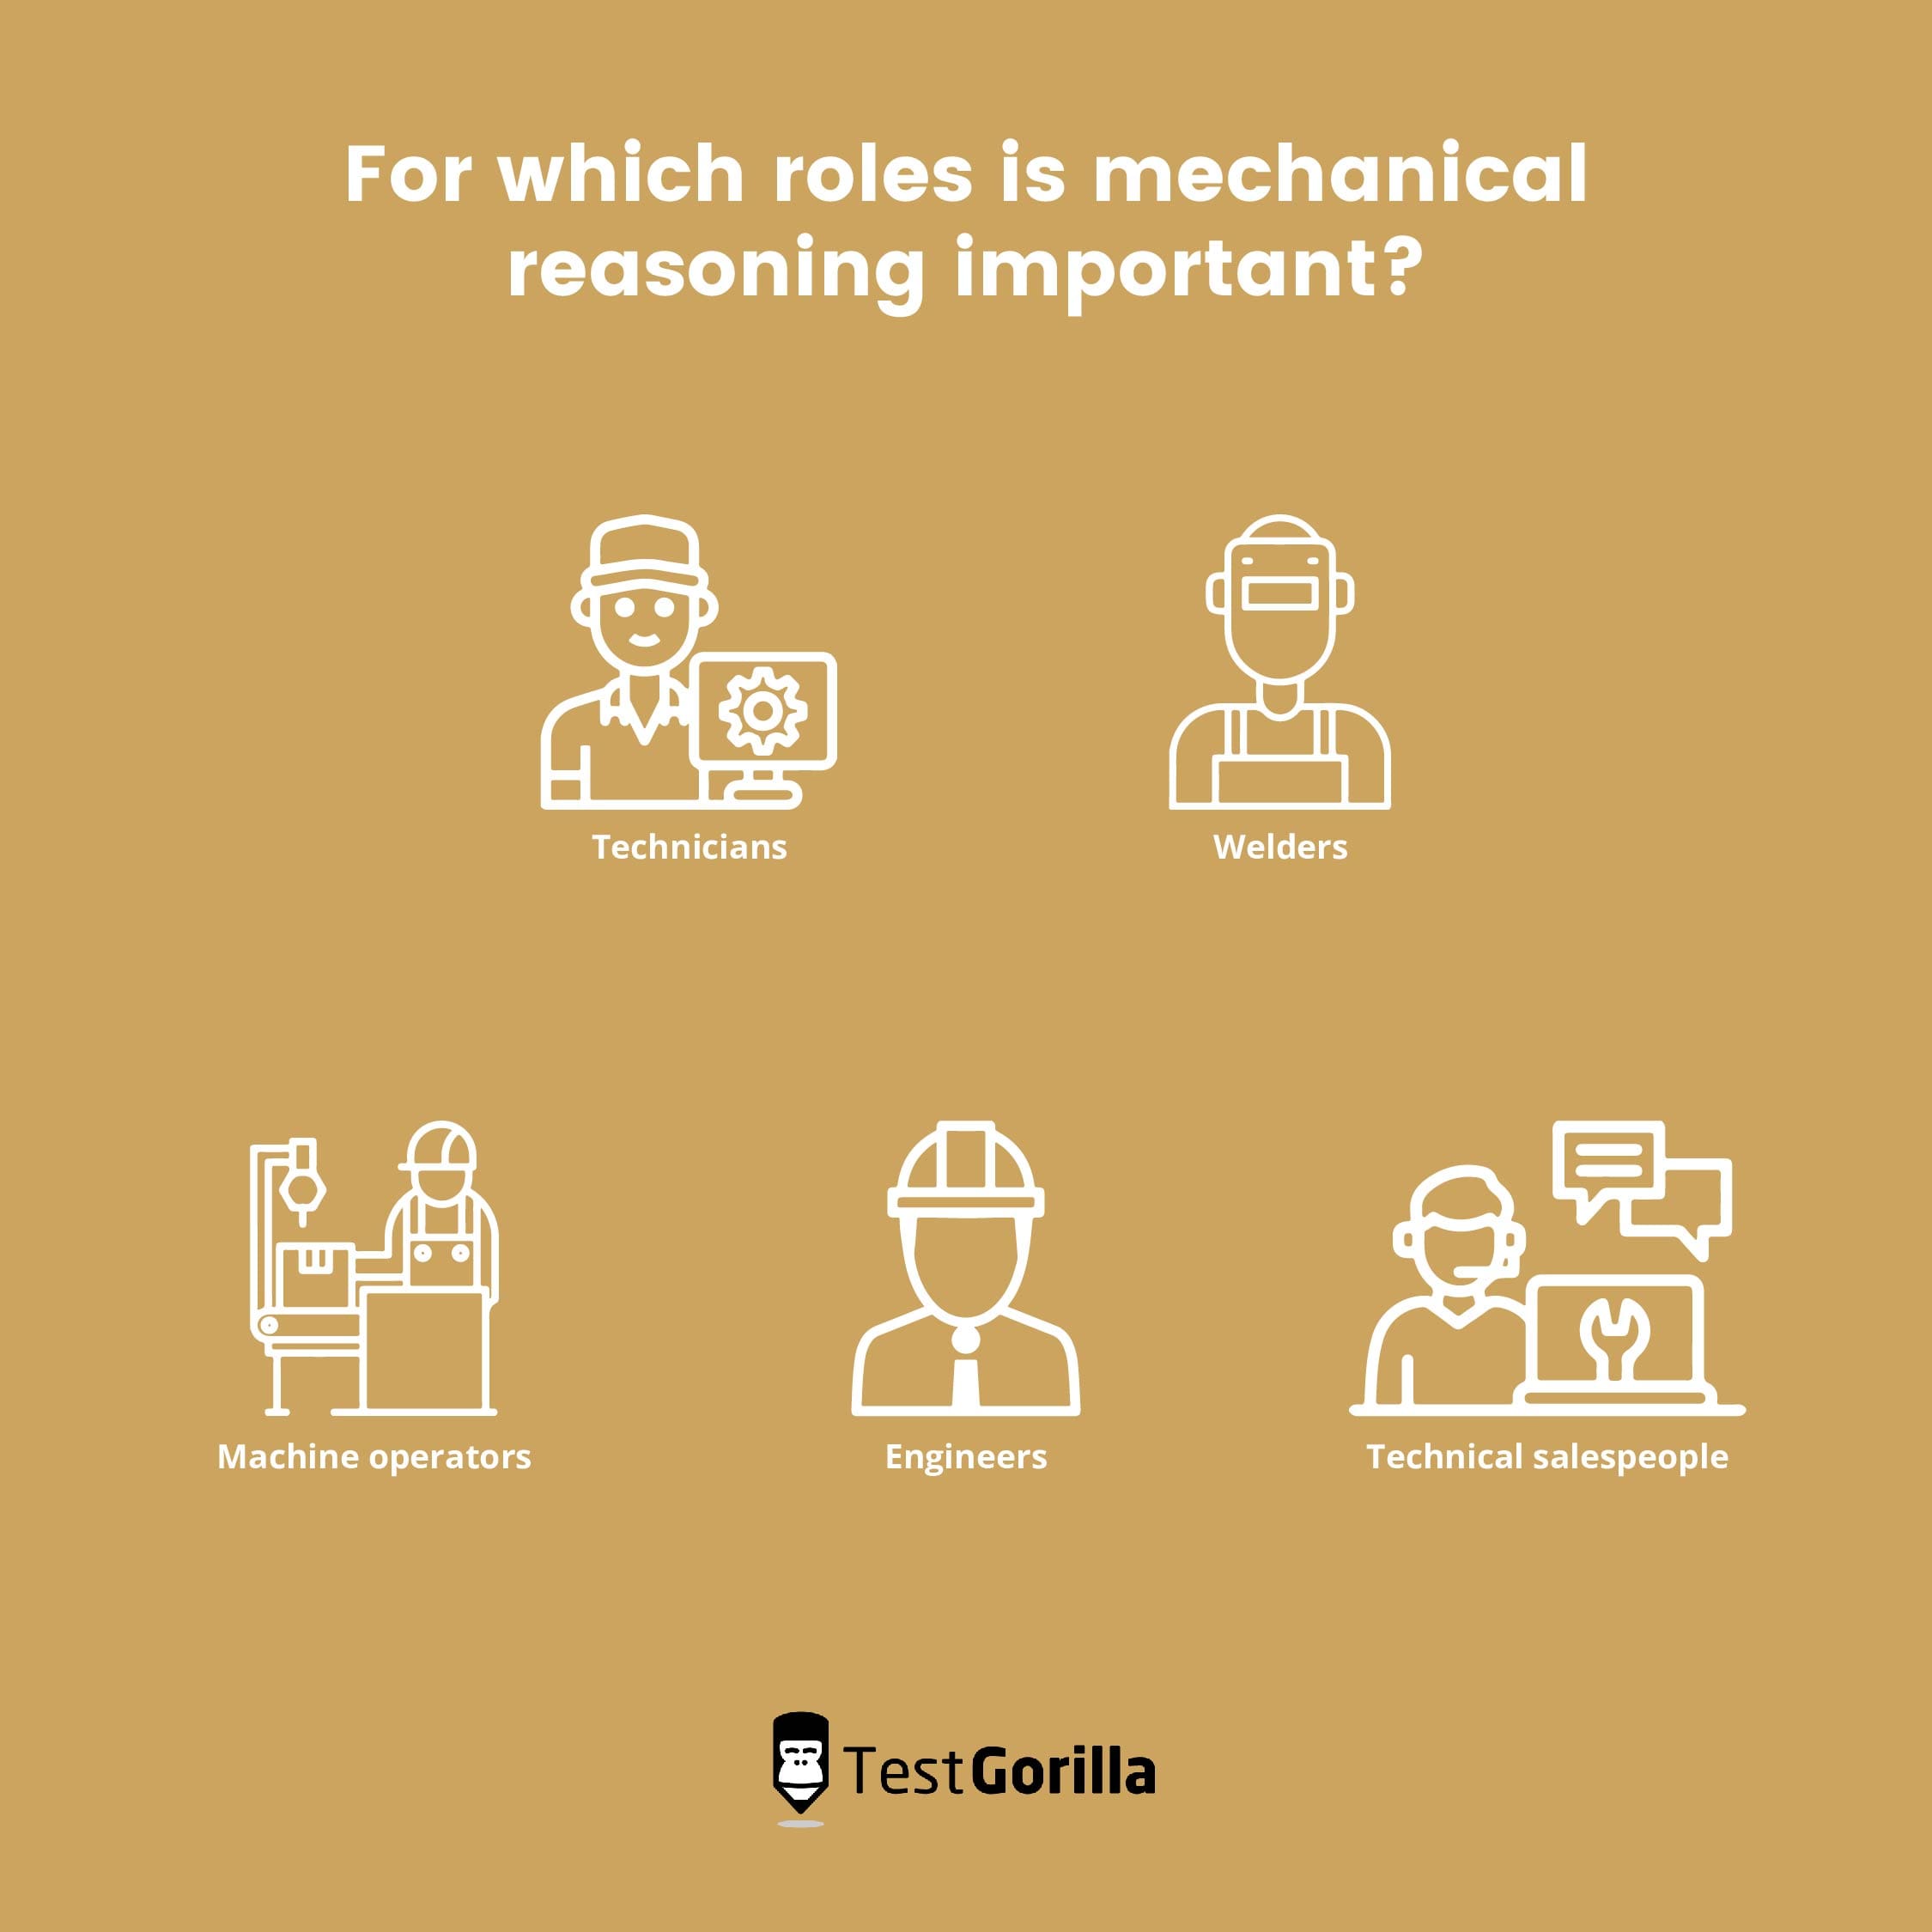 image listing the roles where mechanical reasoning is important